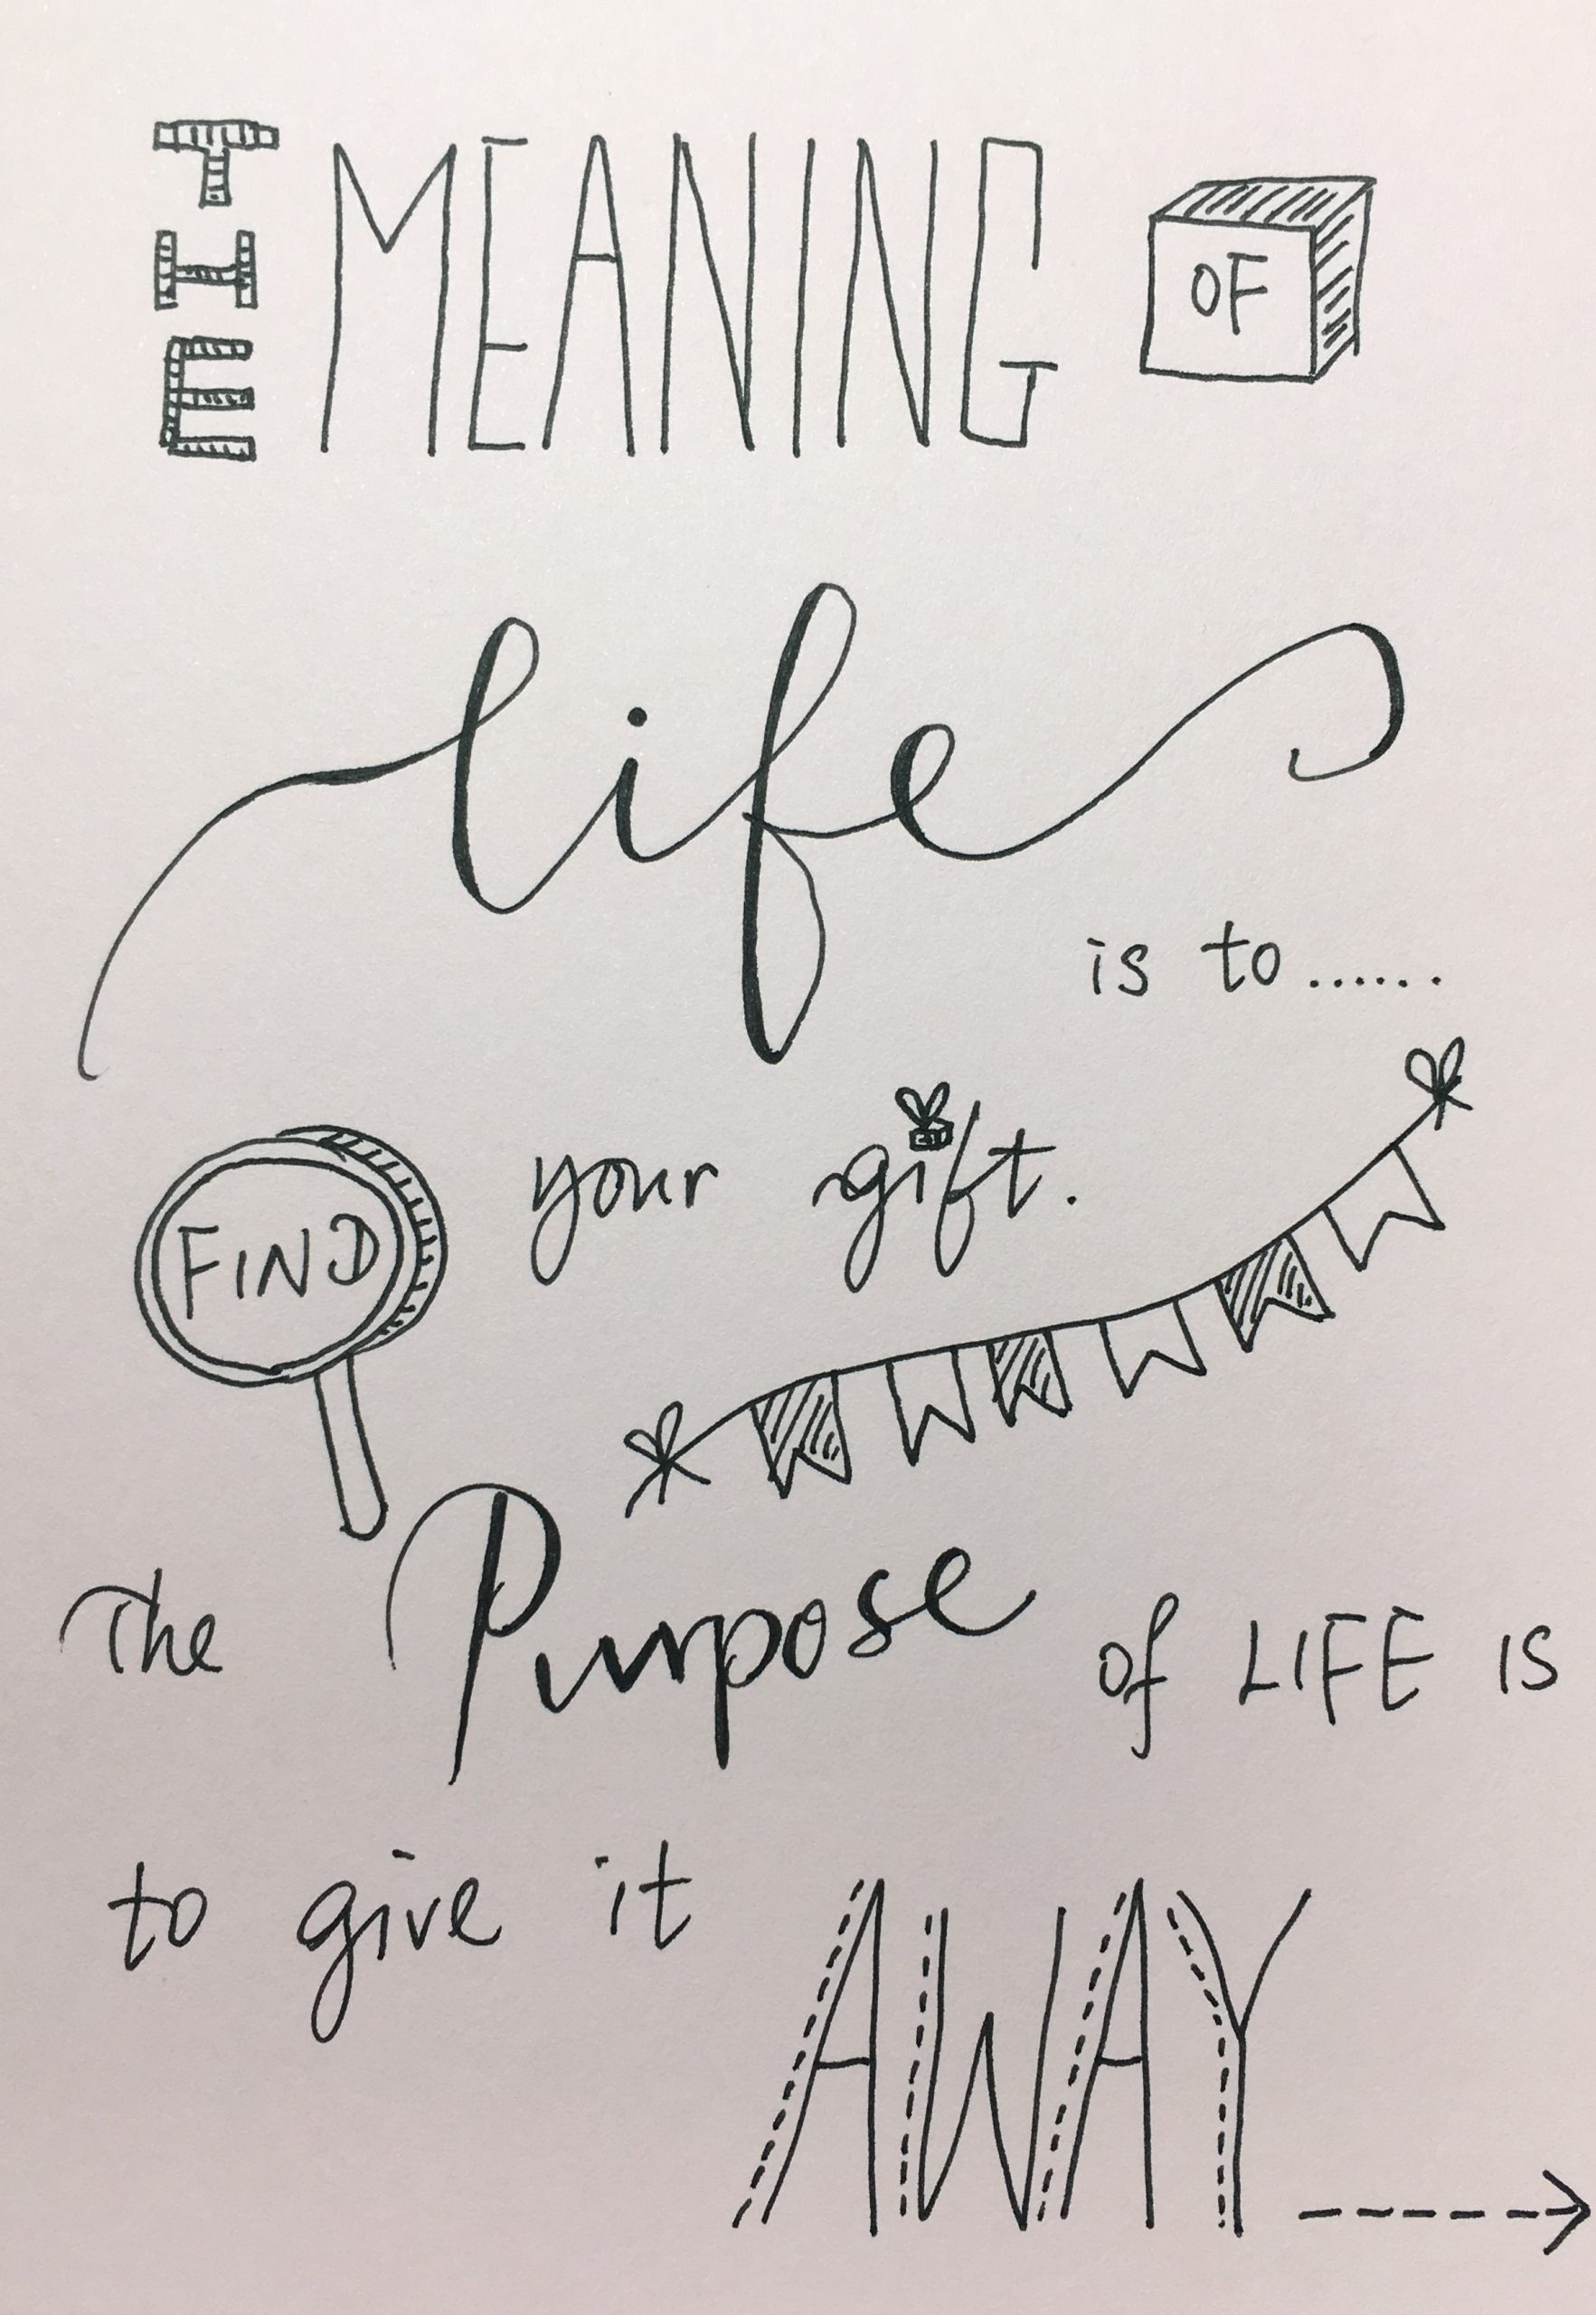 The Meaning of Life is to Find your Gift. The Purpose of Life is to Give it Away.